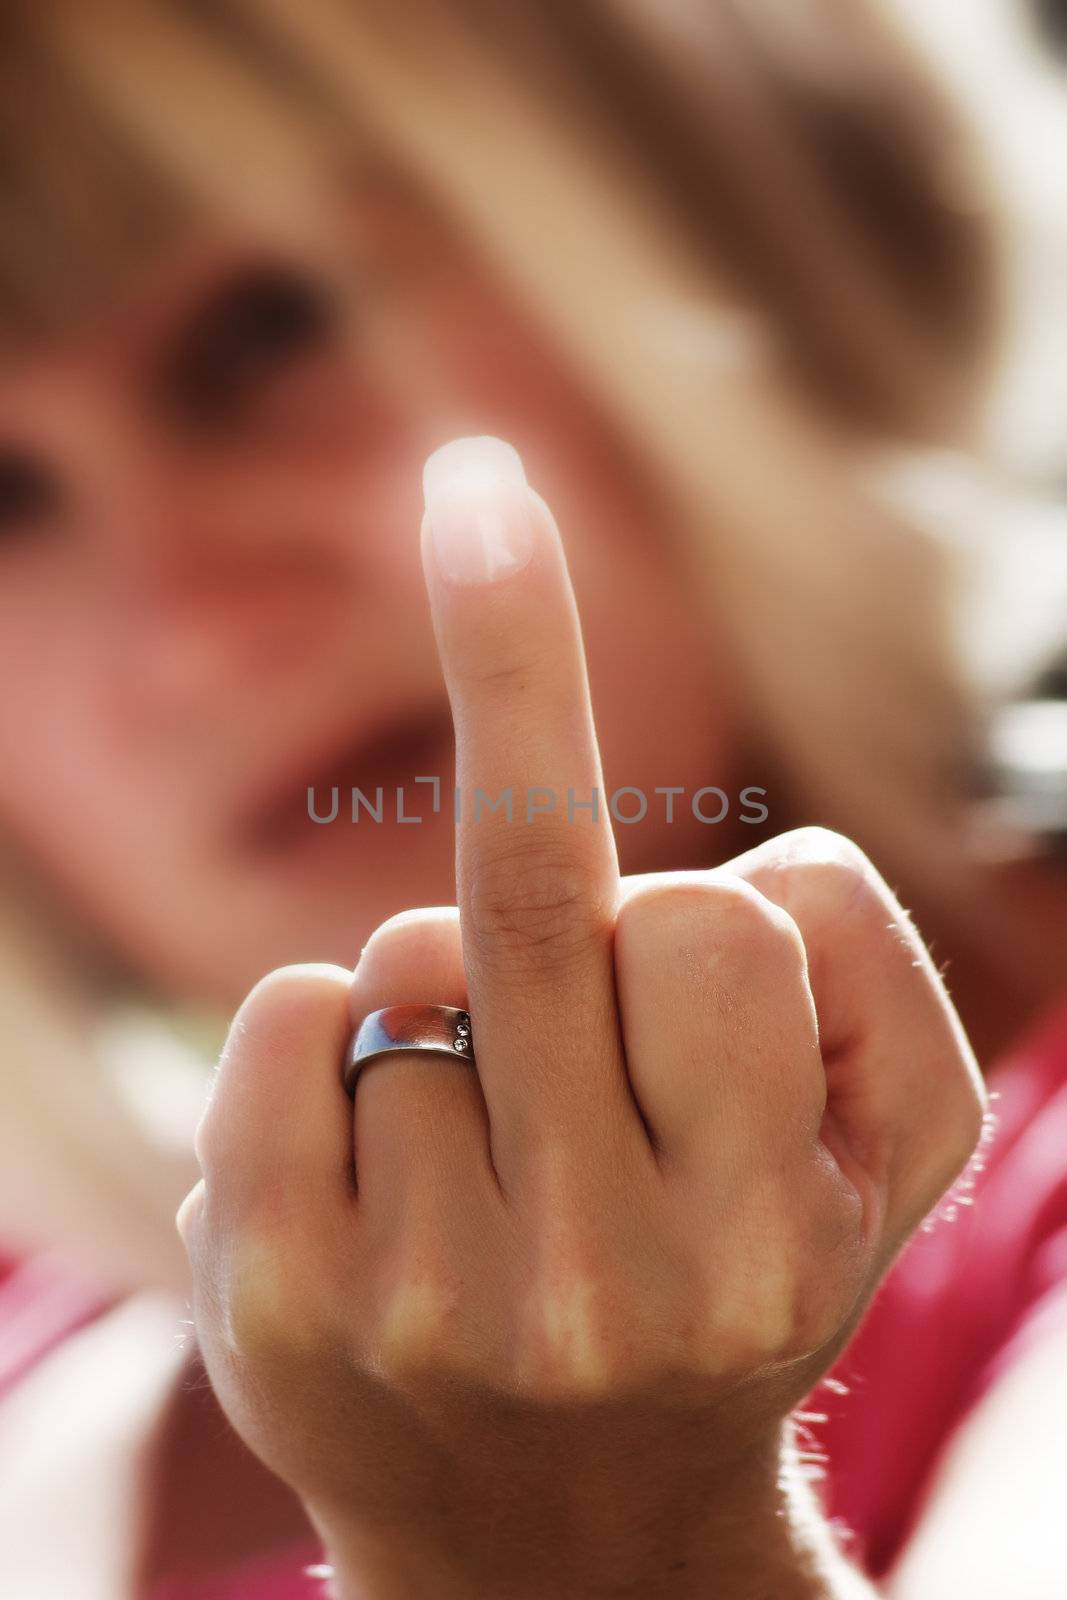 the blonde woman shows glowing middle finger by Hasenonkel